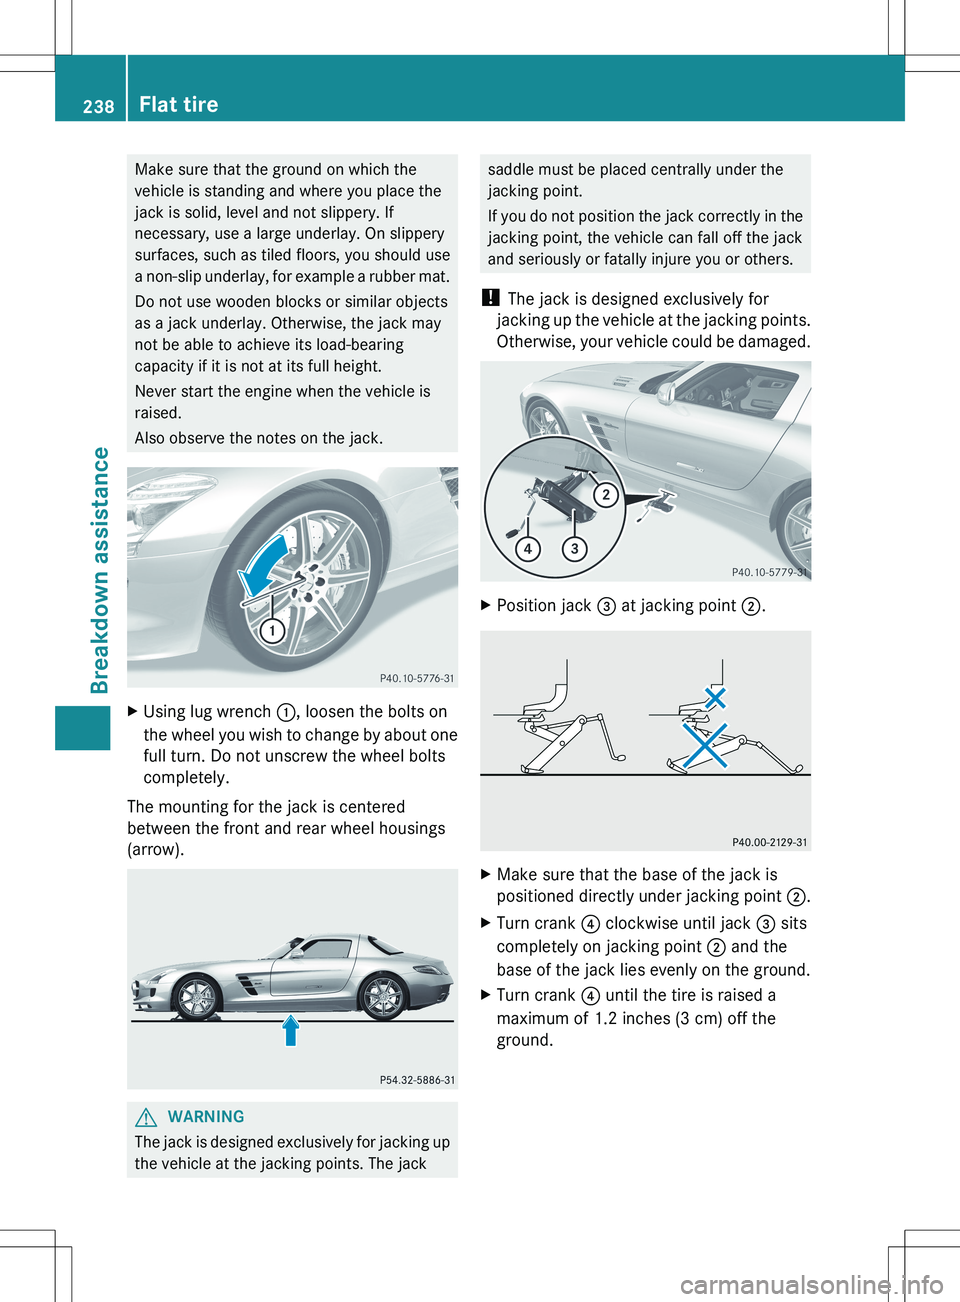 MERCEDES-BENZ SLS AMG ROADSTER 2012  Owners Manual Make sure that the ground on which the
vehicle is standing and where you place the
jack is solid, level and not slippery. If
necessary, use a large underlay. On slippery
surfaces, such as tiled floors